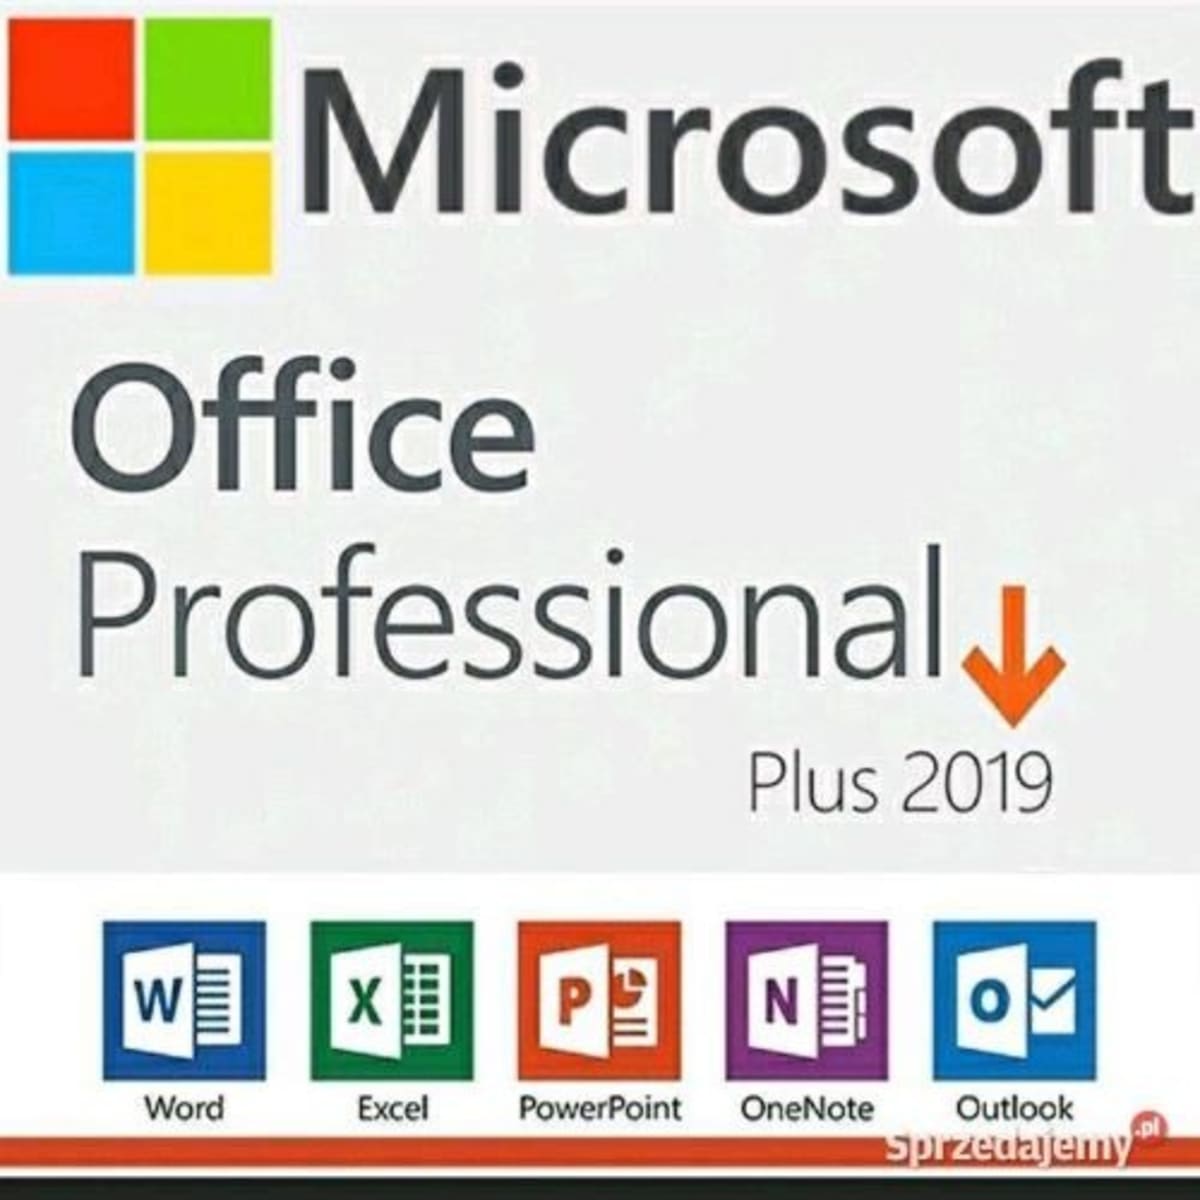 Microsoft Office 2019 Pro Plus Activation Key For 1 Users- Lifetime License  | Konga Online Shopping